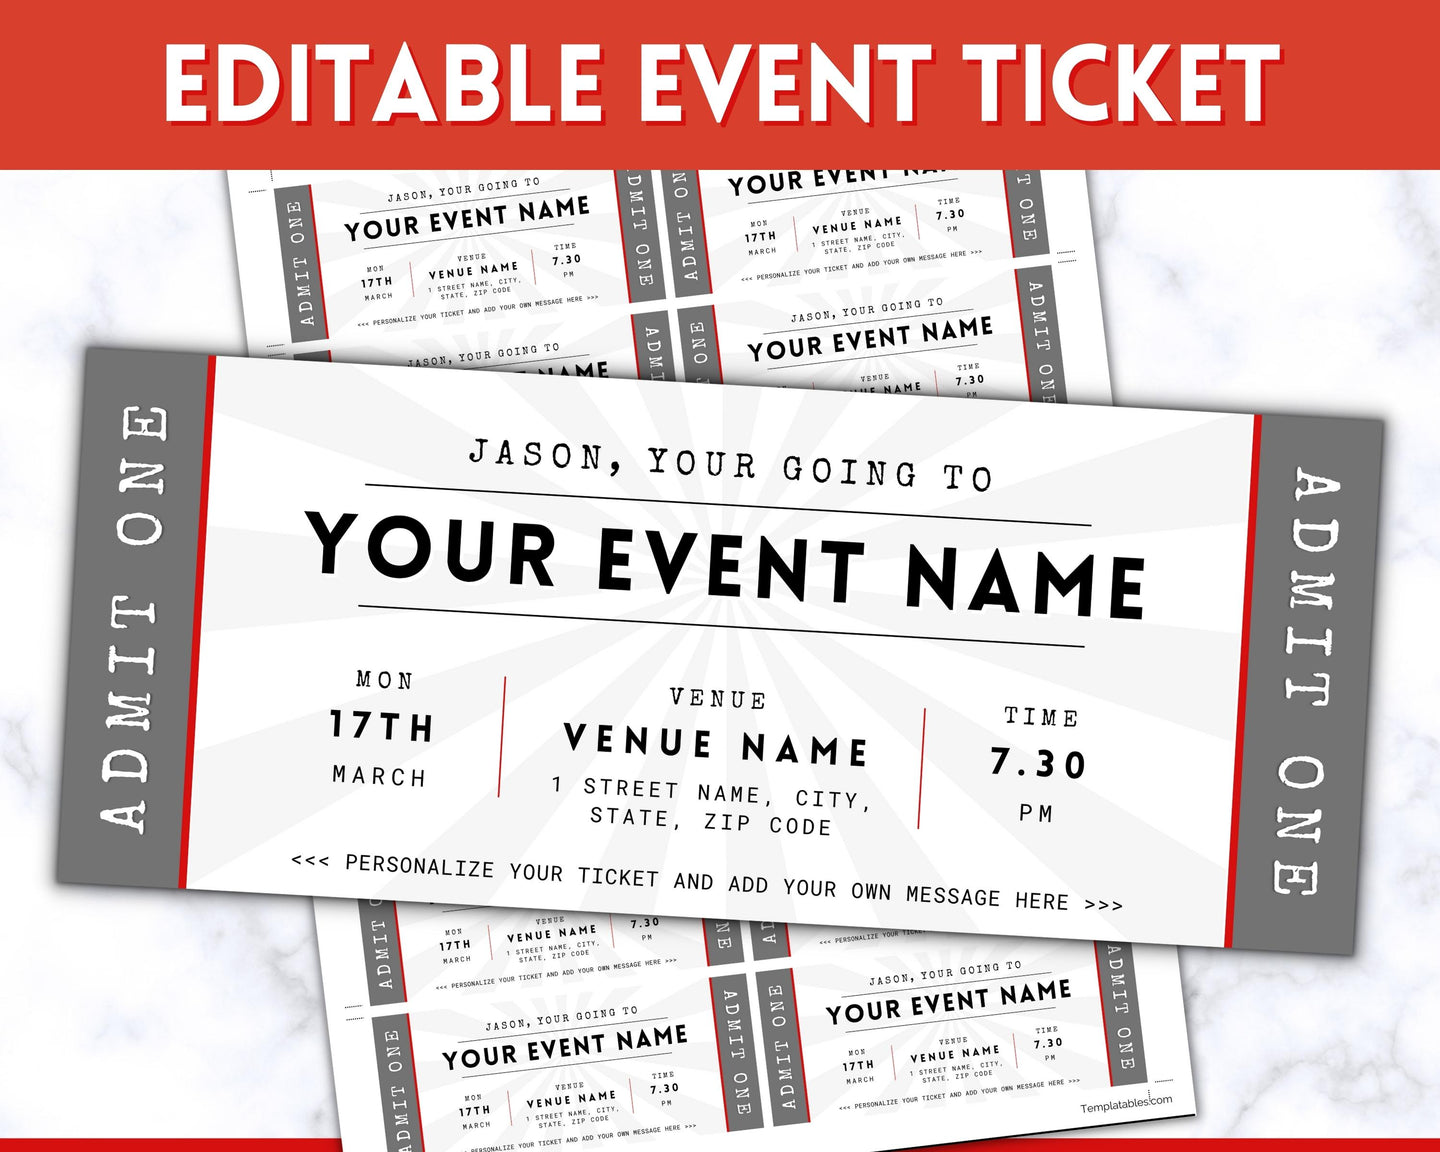 EDITABLE Event Ticket Gift Template | DIY Templates for Concerts, Theatre Shows, Surprise Gifts & Special Occassions | Mono